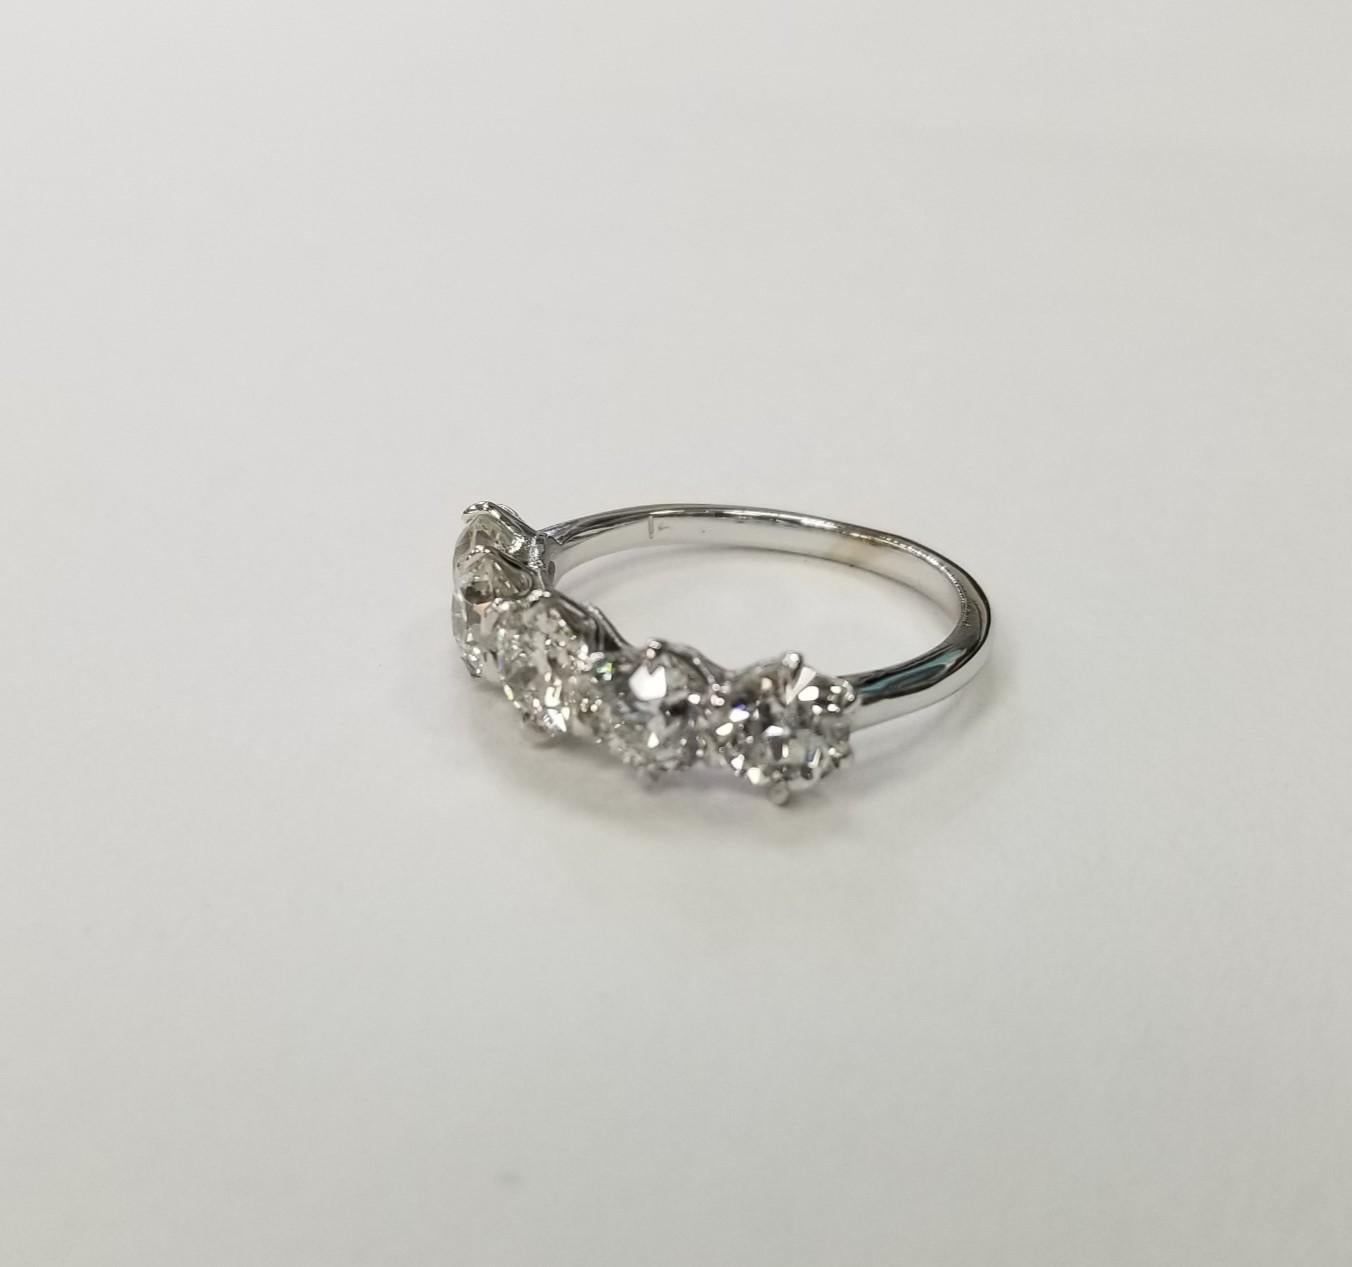 14k white gold 5 stone Old European cut diamond Anniversary ring 2.50cts., containing 5 Old European cut diamond; color 